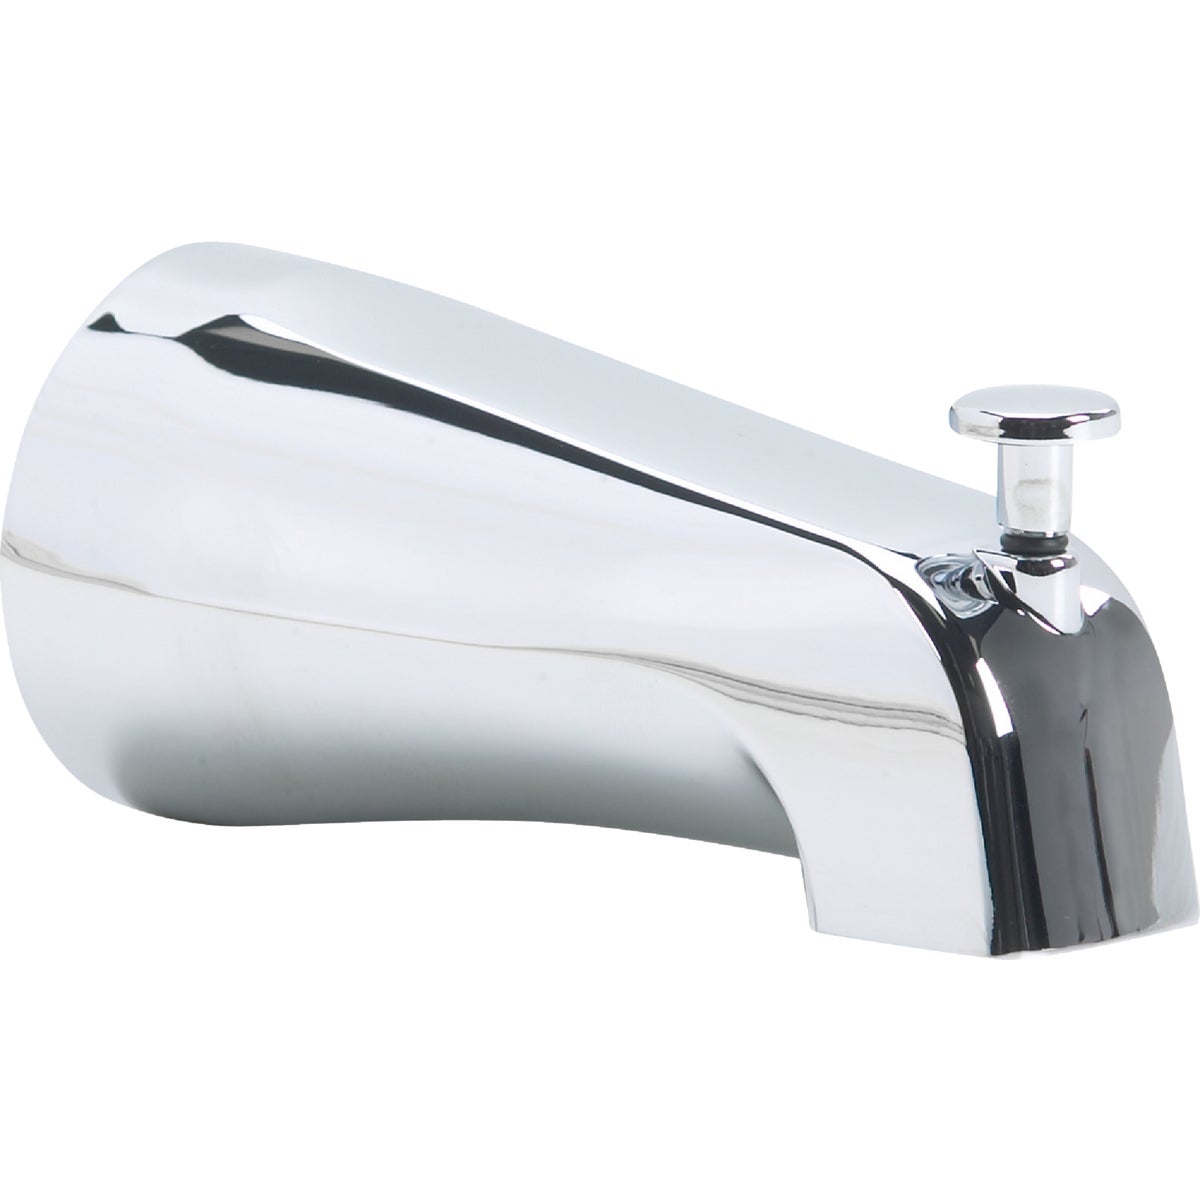 Item 449105, Wall bath spout with diverter, 1/2" NPT connection for use with any shower